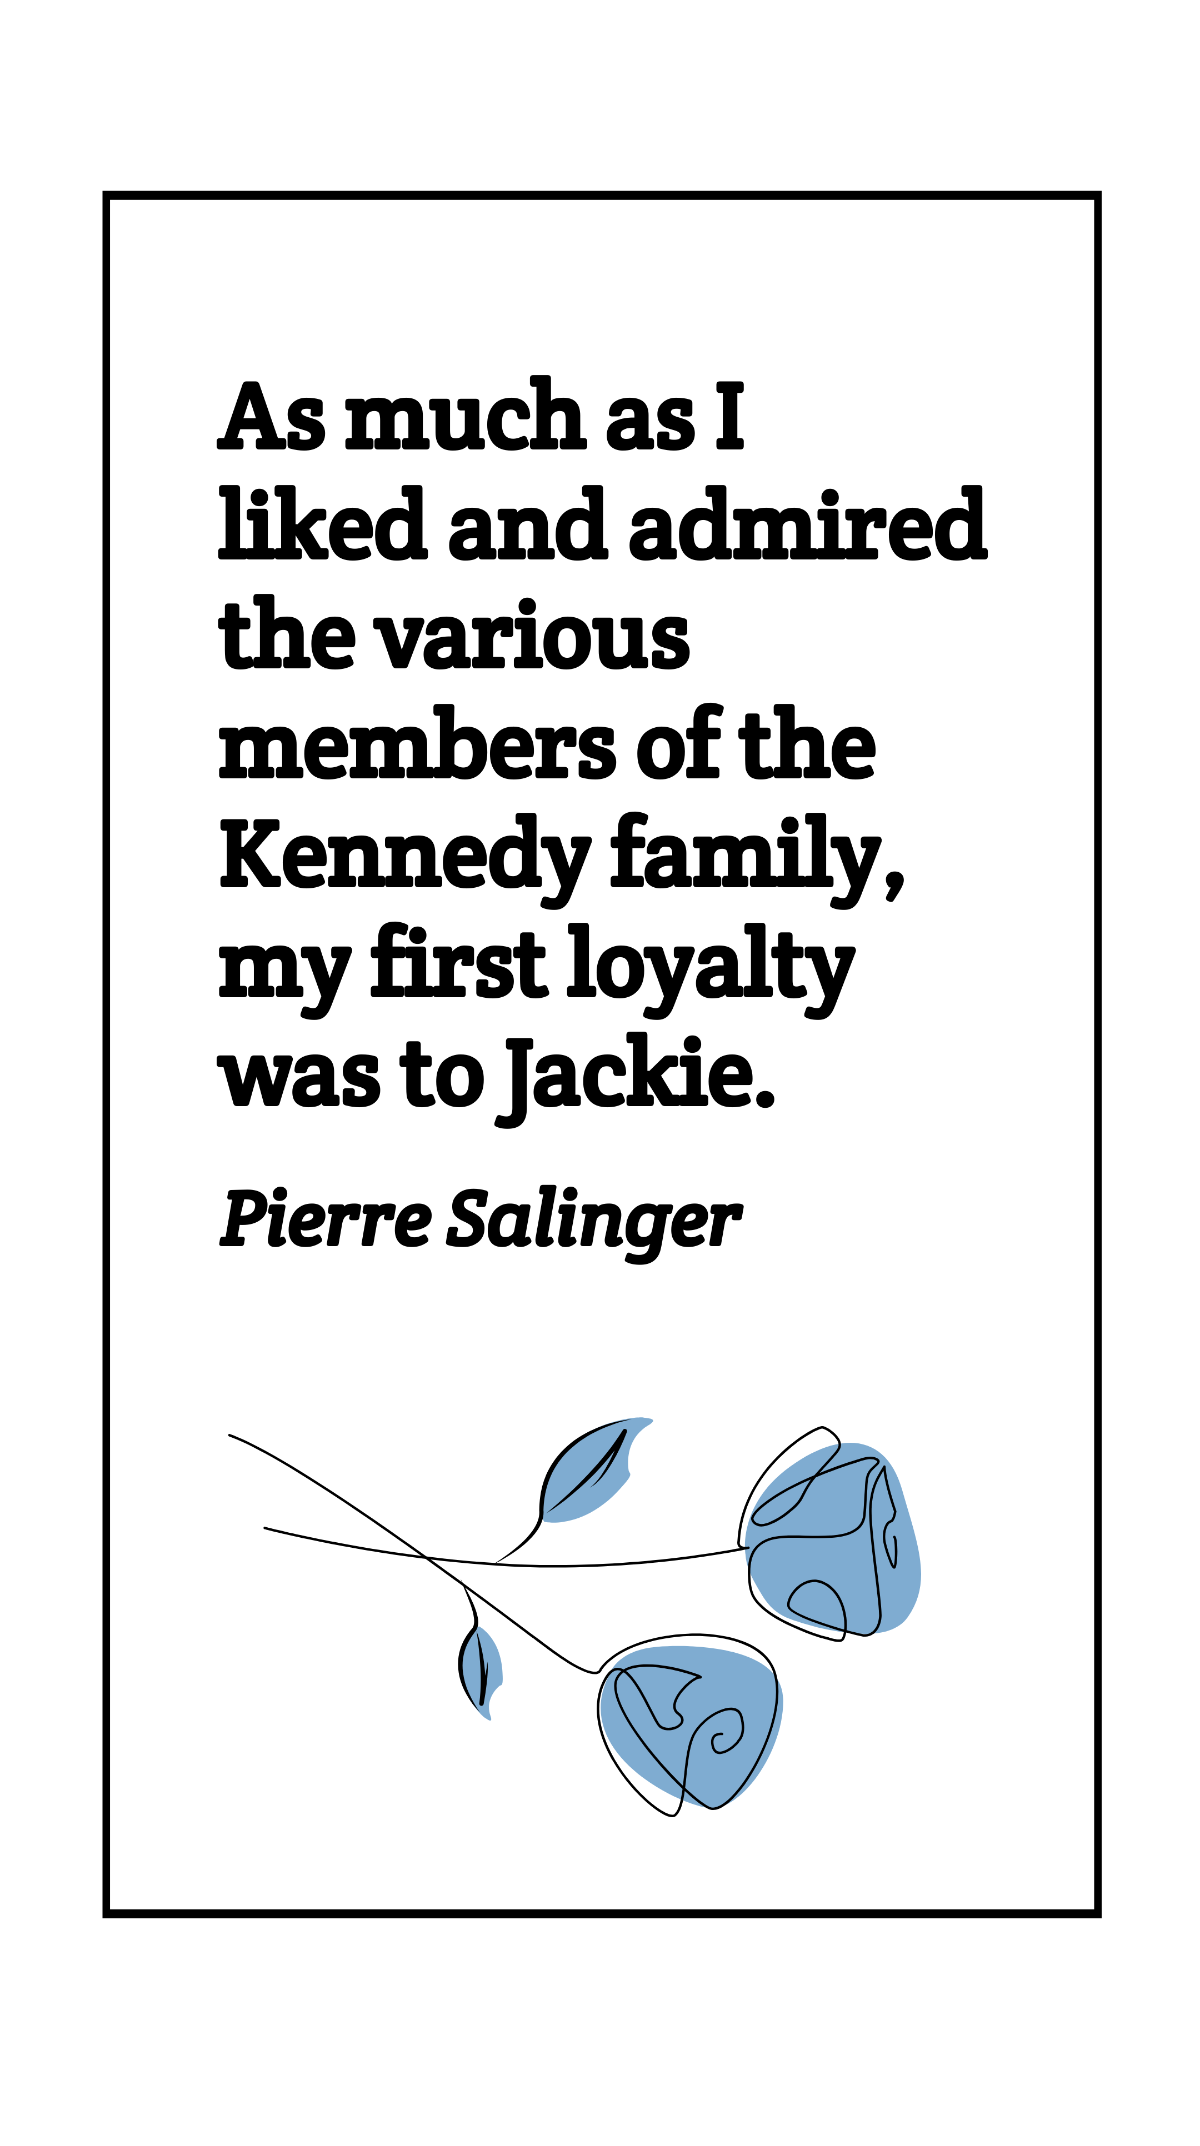 Pierre Salinger - As much as I liked and admired the various members of the Kennedy family, my first loyalty was to Jackie. Template